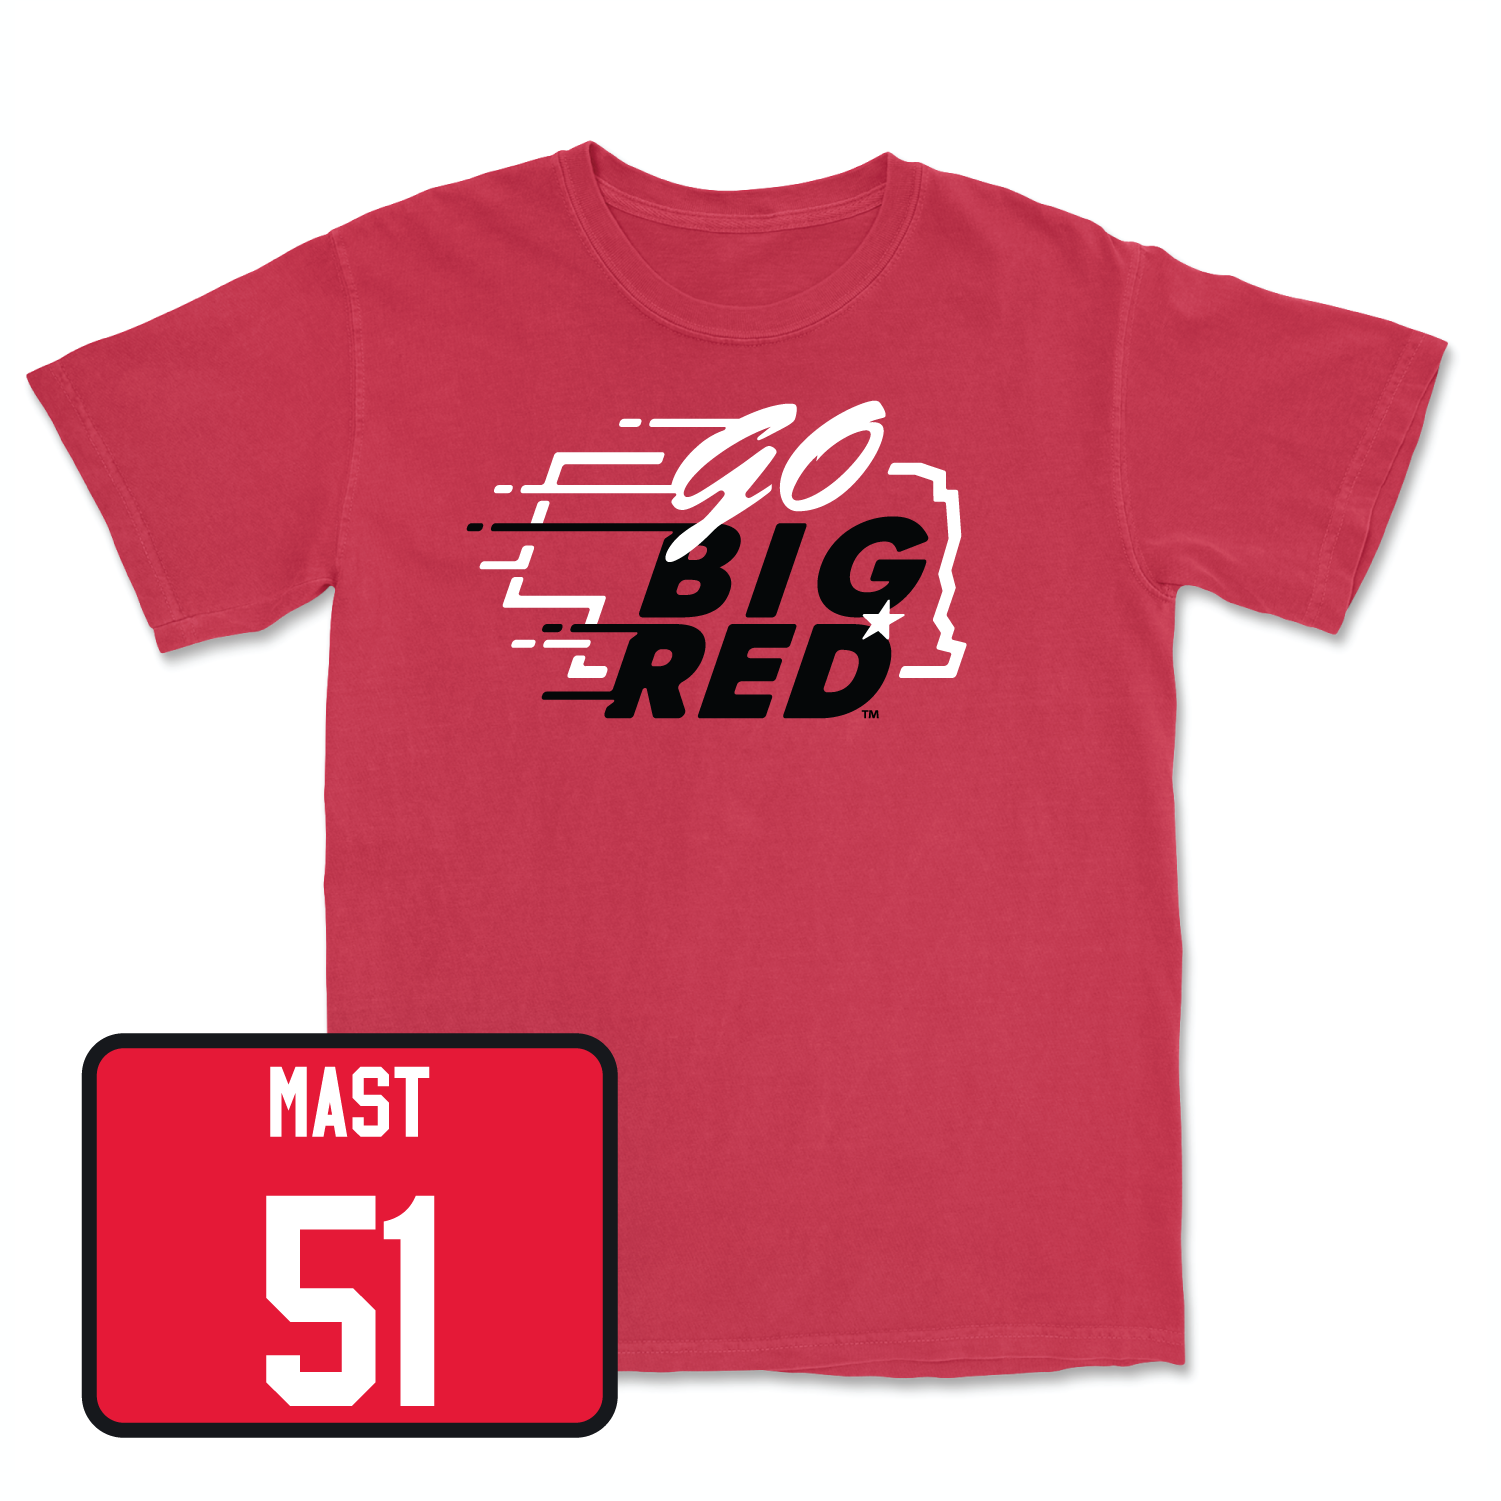 Red Men's Basketball GBR Tee 2X-Large / Rienk Mast | #51